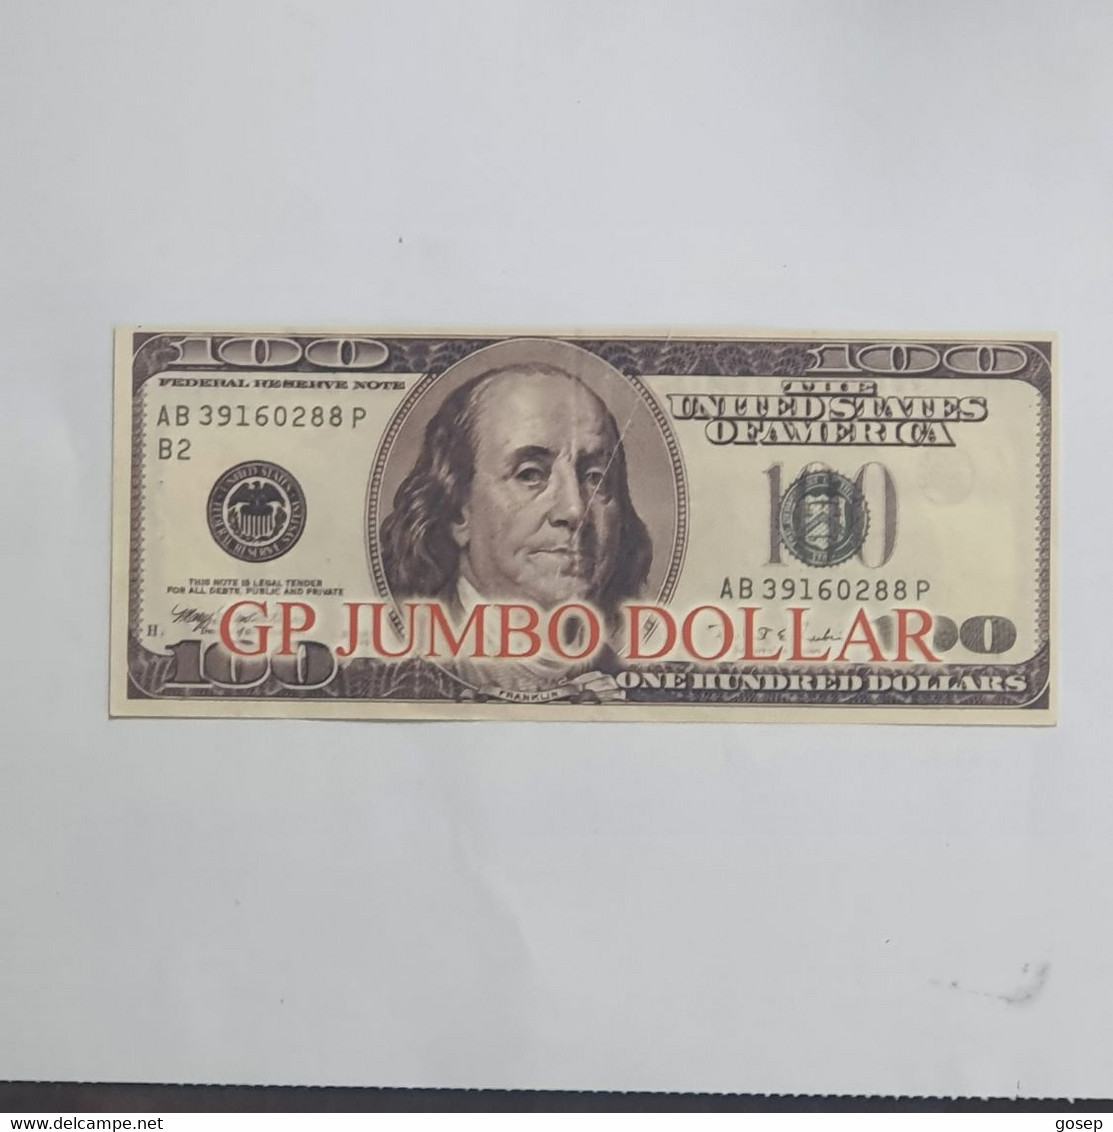 U.S.A-federal Reserve Note-(100$)-GP JUMBO DOLLAR-(17)-(AB 39160288  P B2)-(?)-(Sample Notes)-very Good - Colecciones Lotes Mixtos